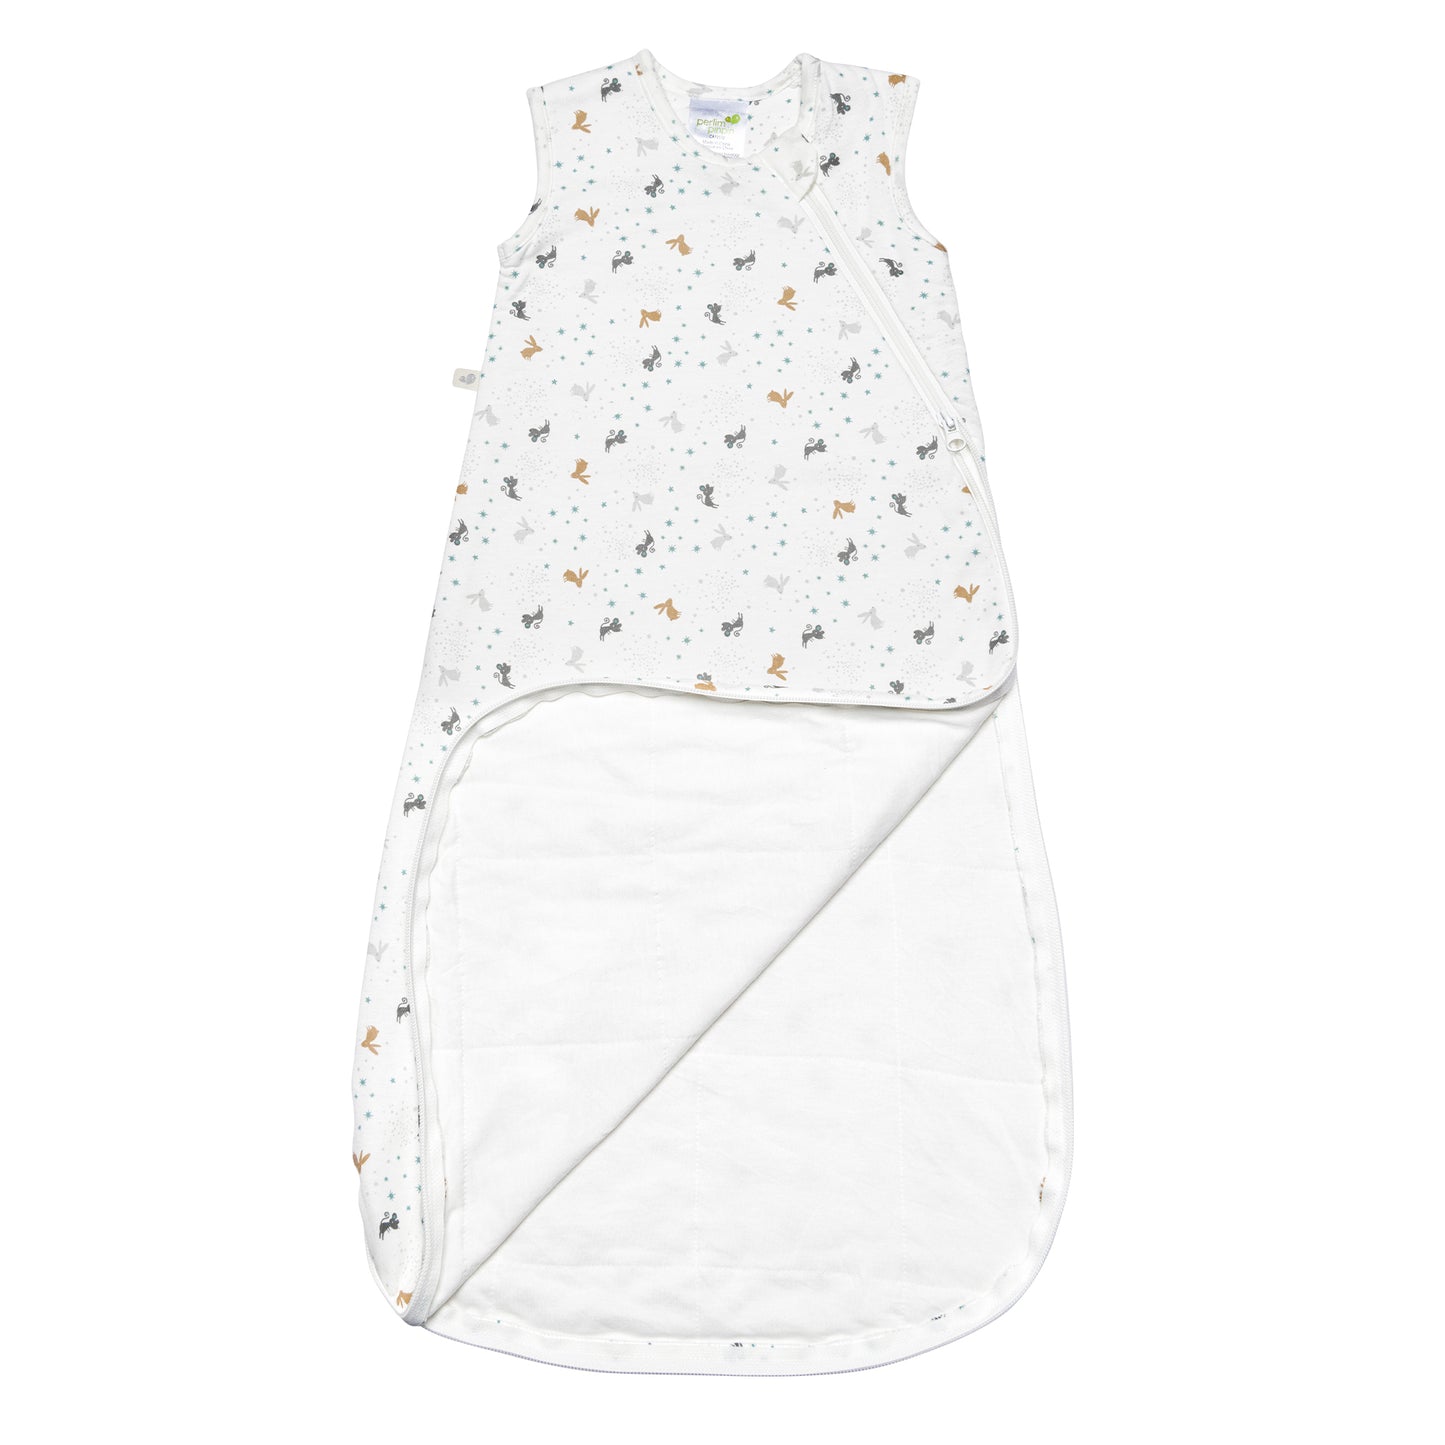 Quilted bamboo sleep bag - Mice (2.5 togs)